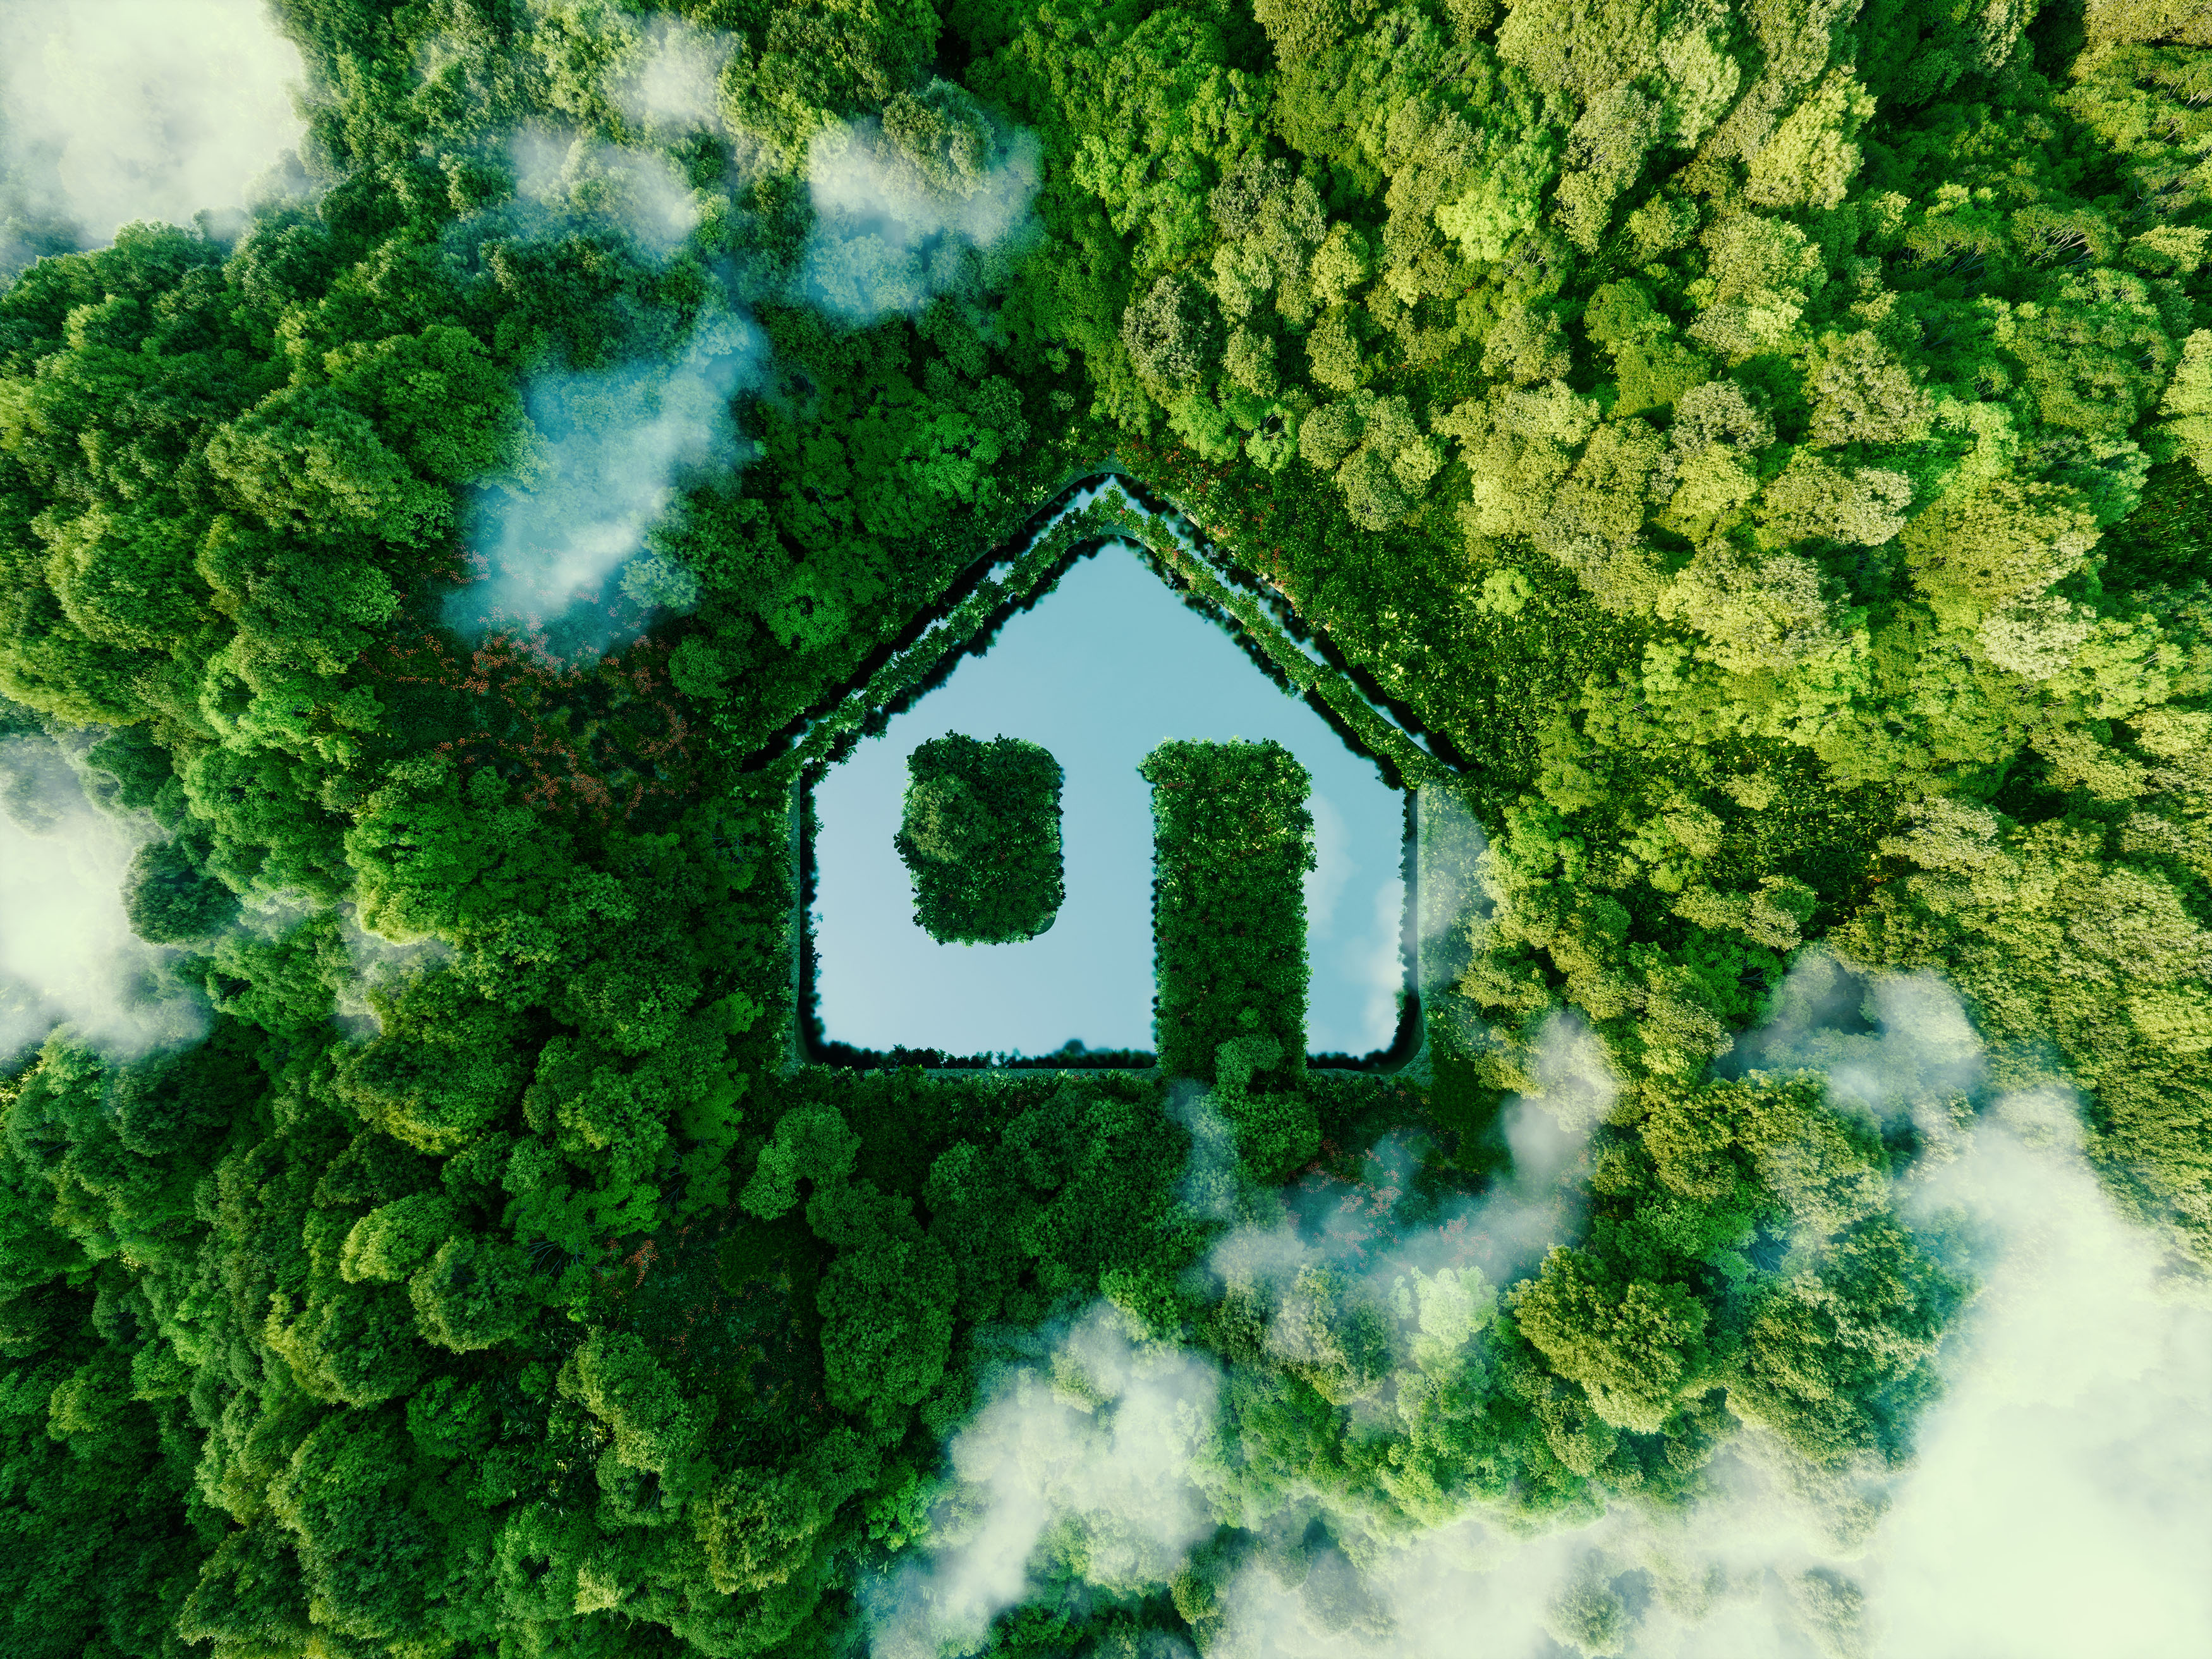 The shape of a house outlined in water, with a forest surrounding it and clouds above.